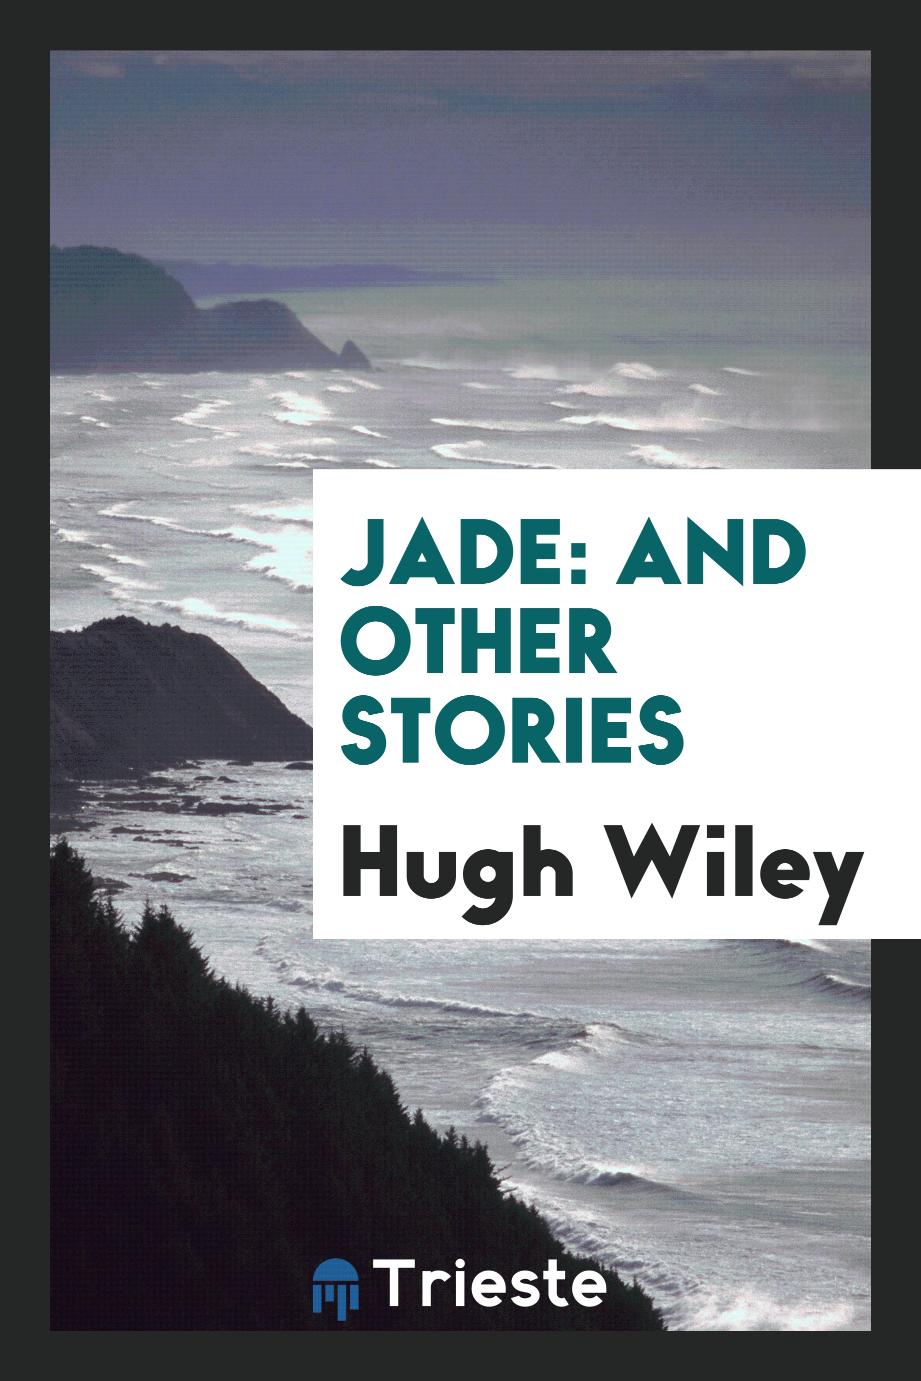 Jade: and other stories